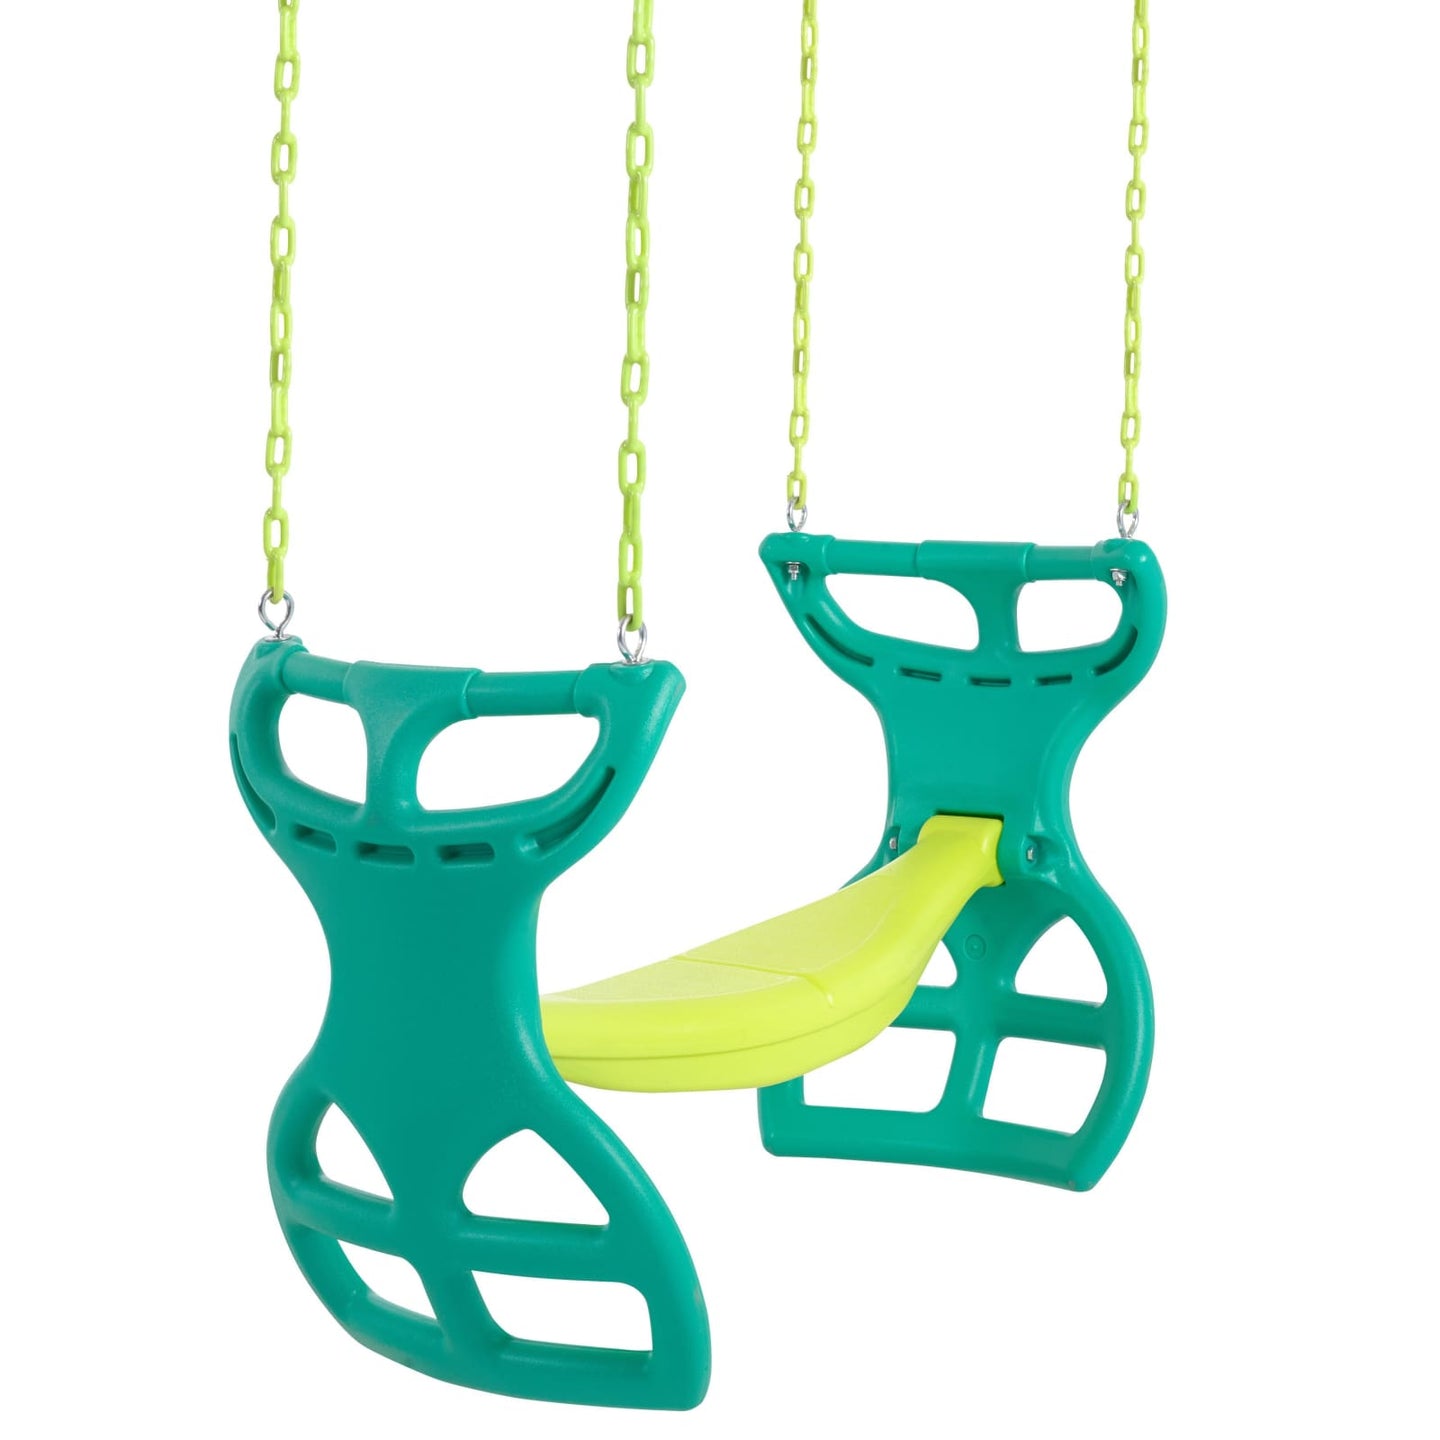 Swingan - Two Seater Glider Swing - Green - Yellow - Swgsc-Gy - Swings & Accessories